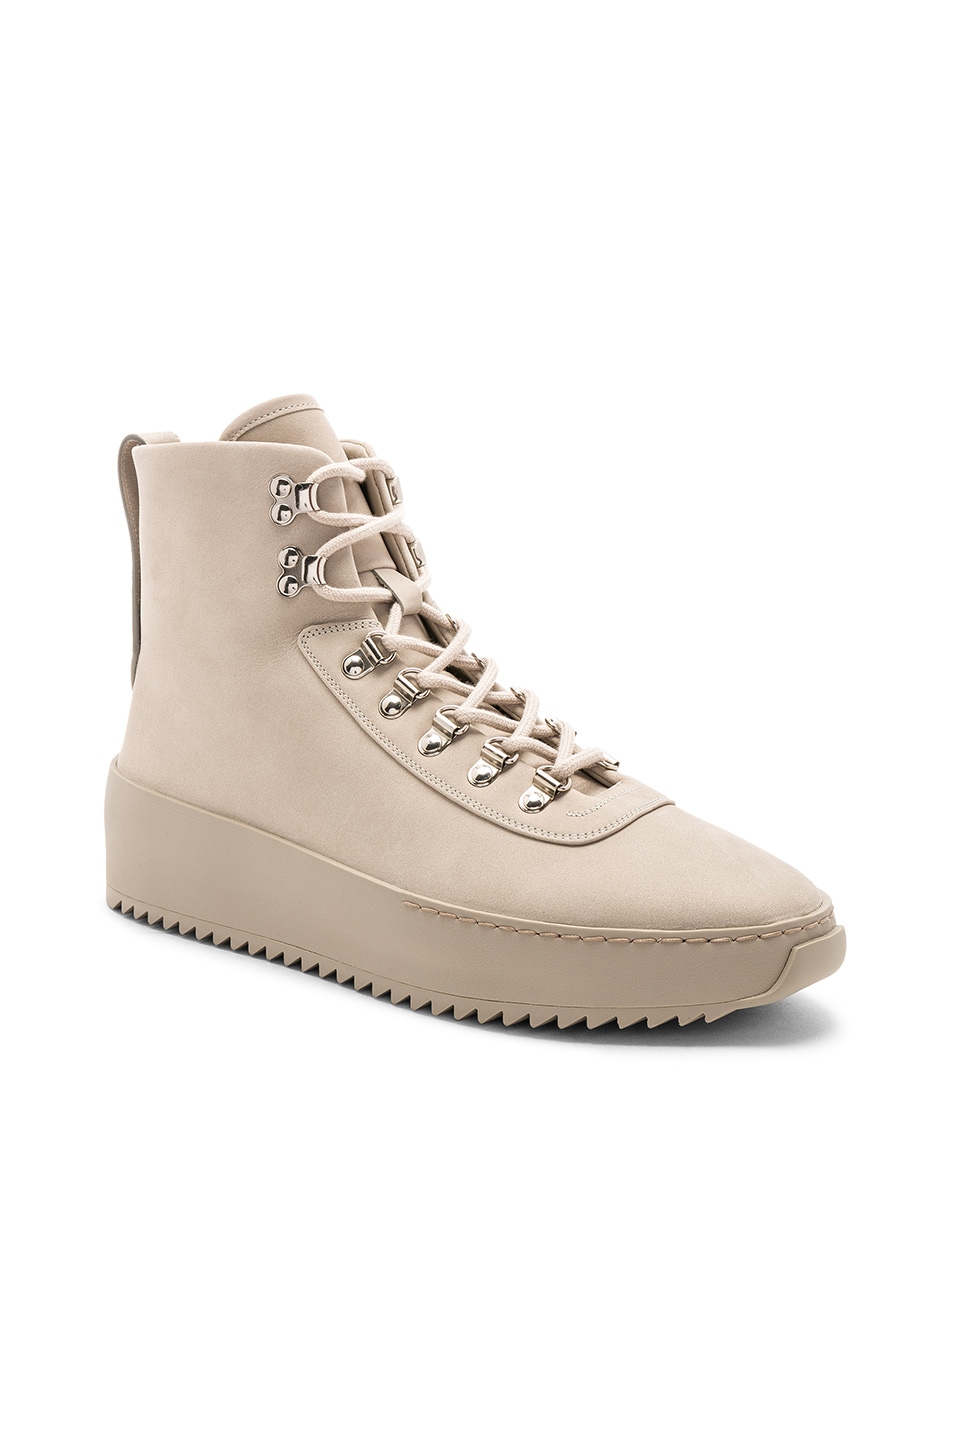 Image 1 of Fear of God Nubuck Leather Hiking Sneakers in Perla